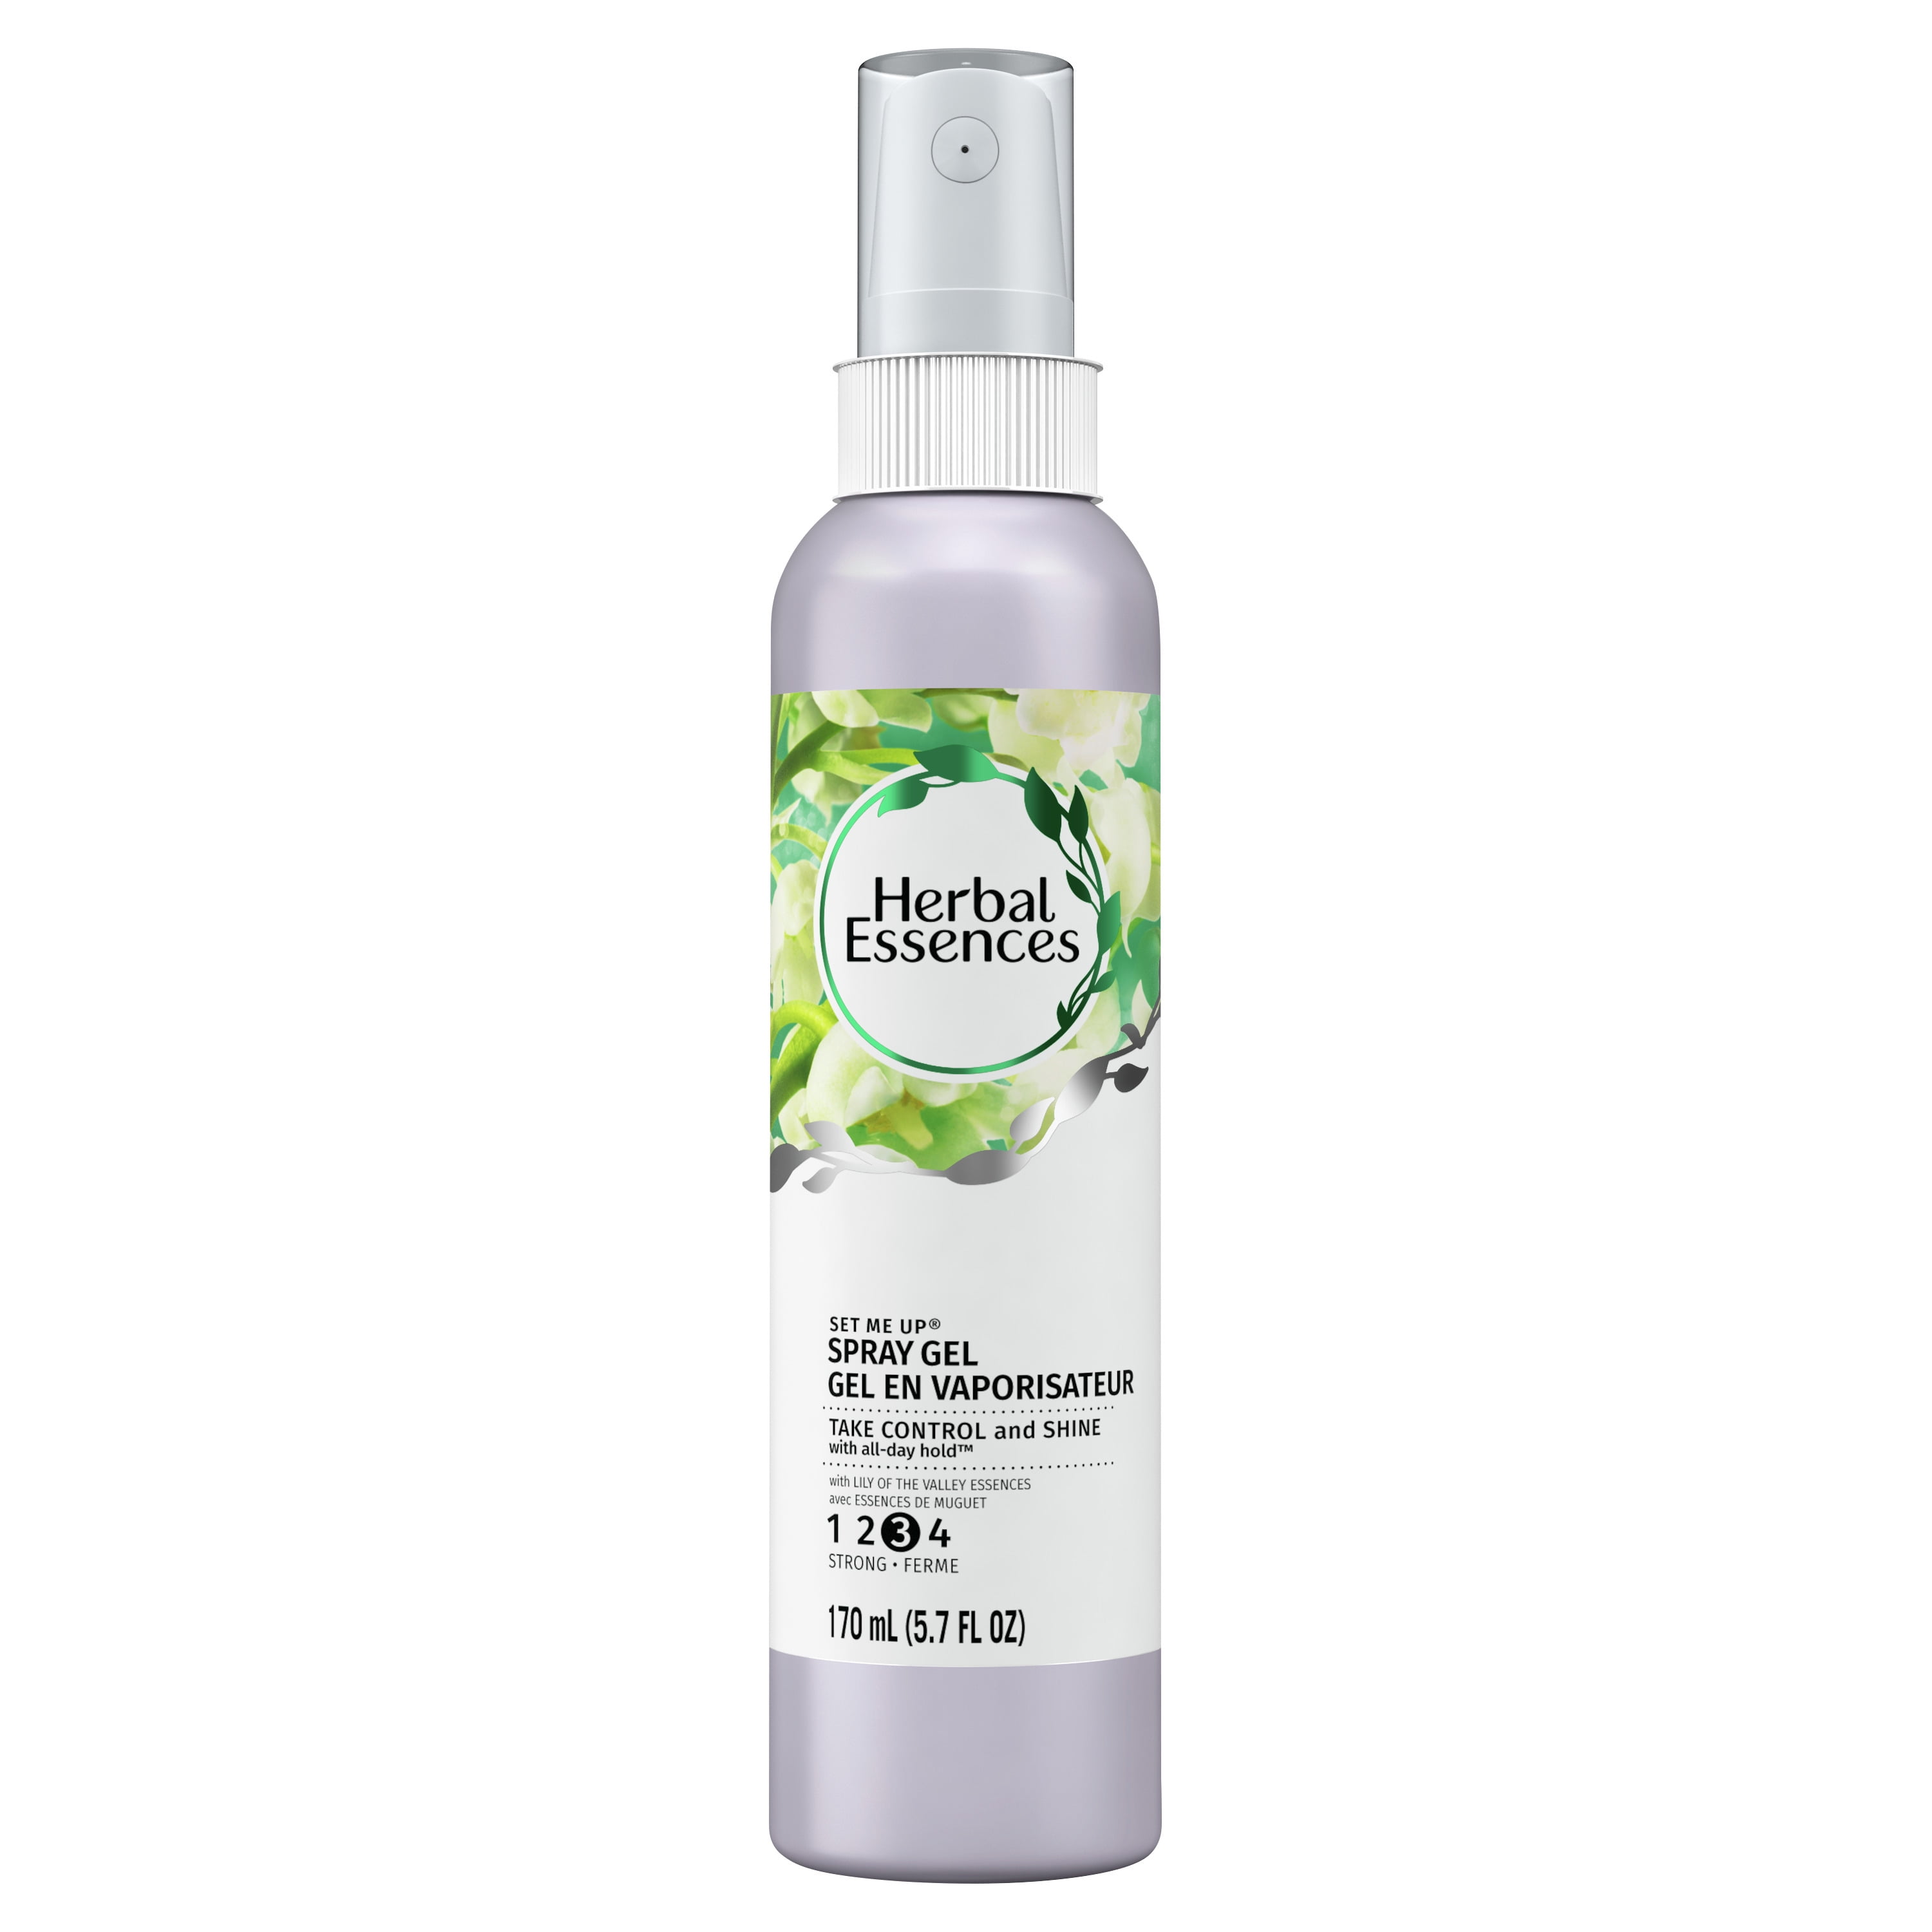 Herbal Essences Set Me Up Spray Gel with Lily of the Valley Essences,   fl oz 